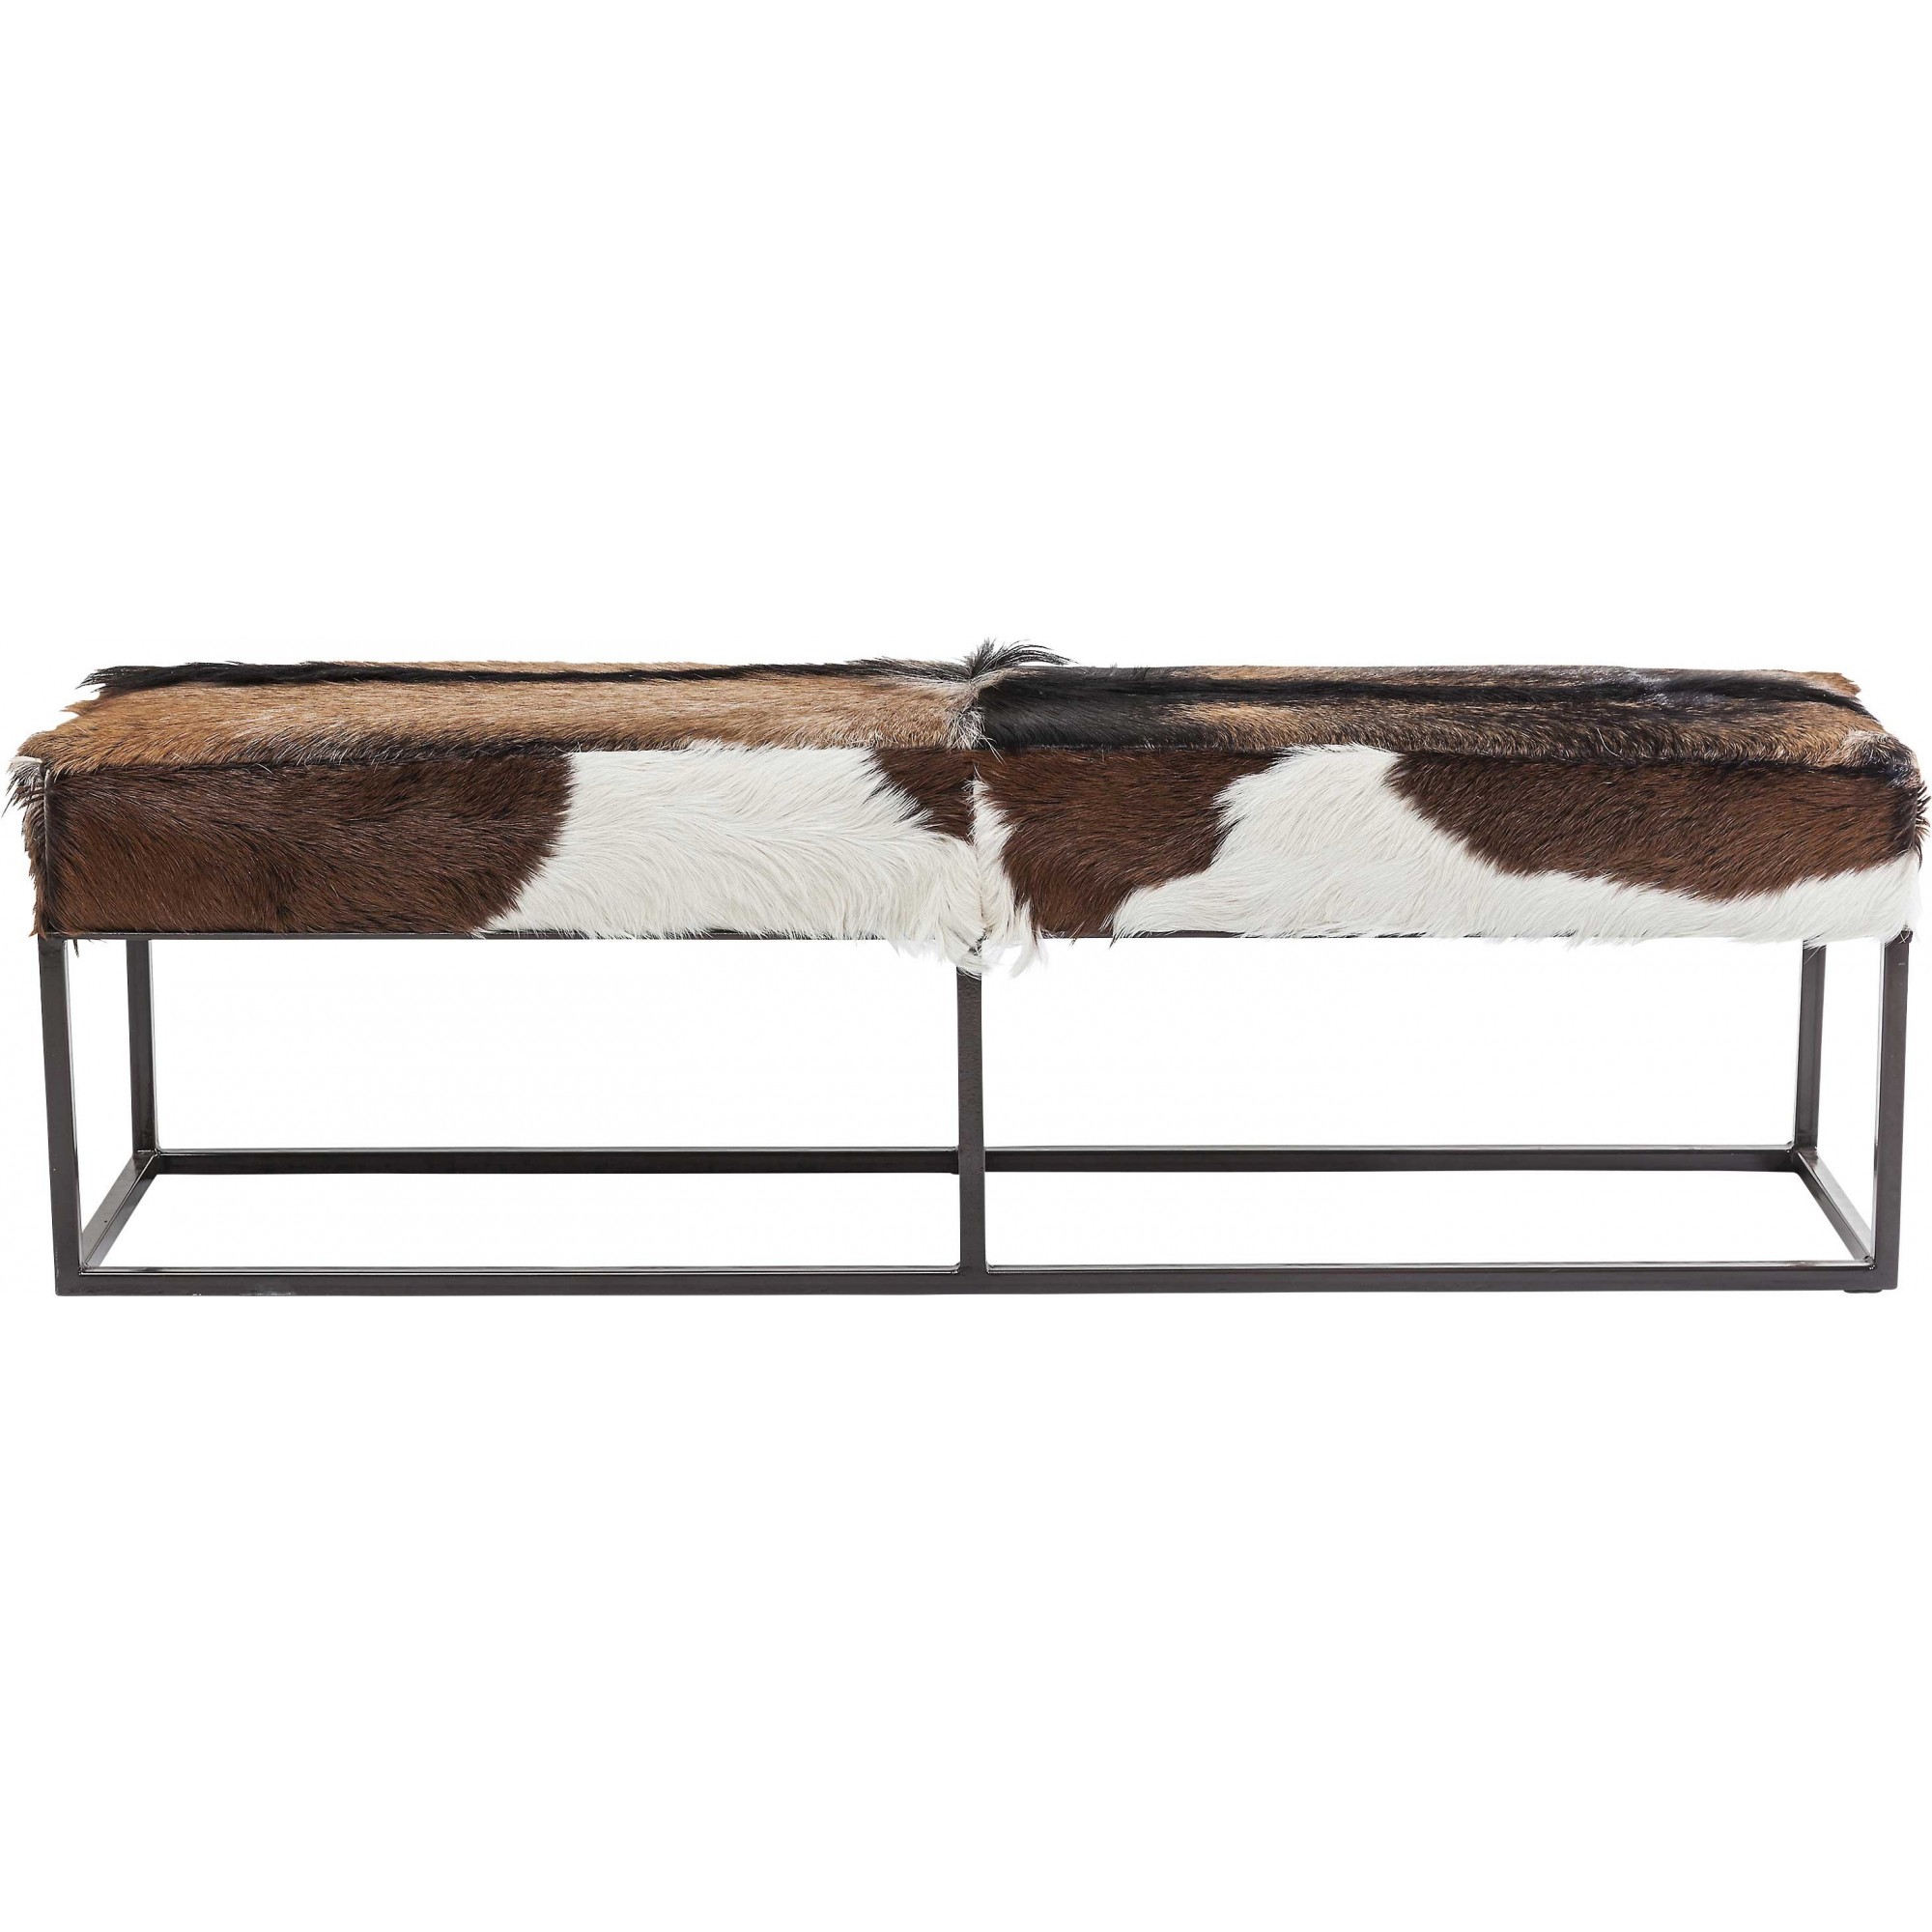 Bench Country Life Kare Design